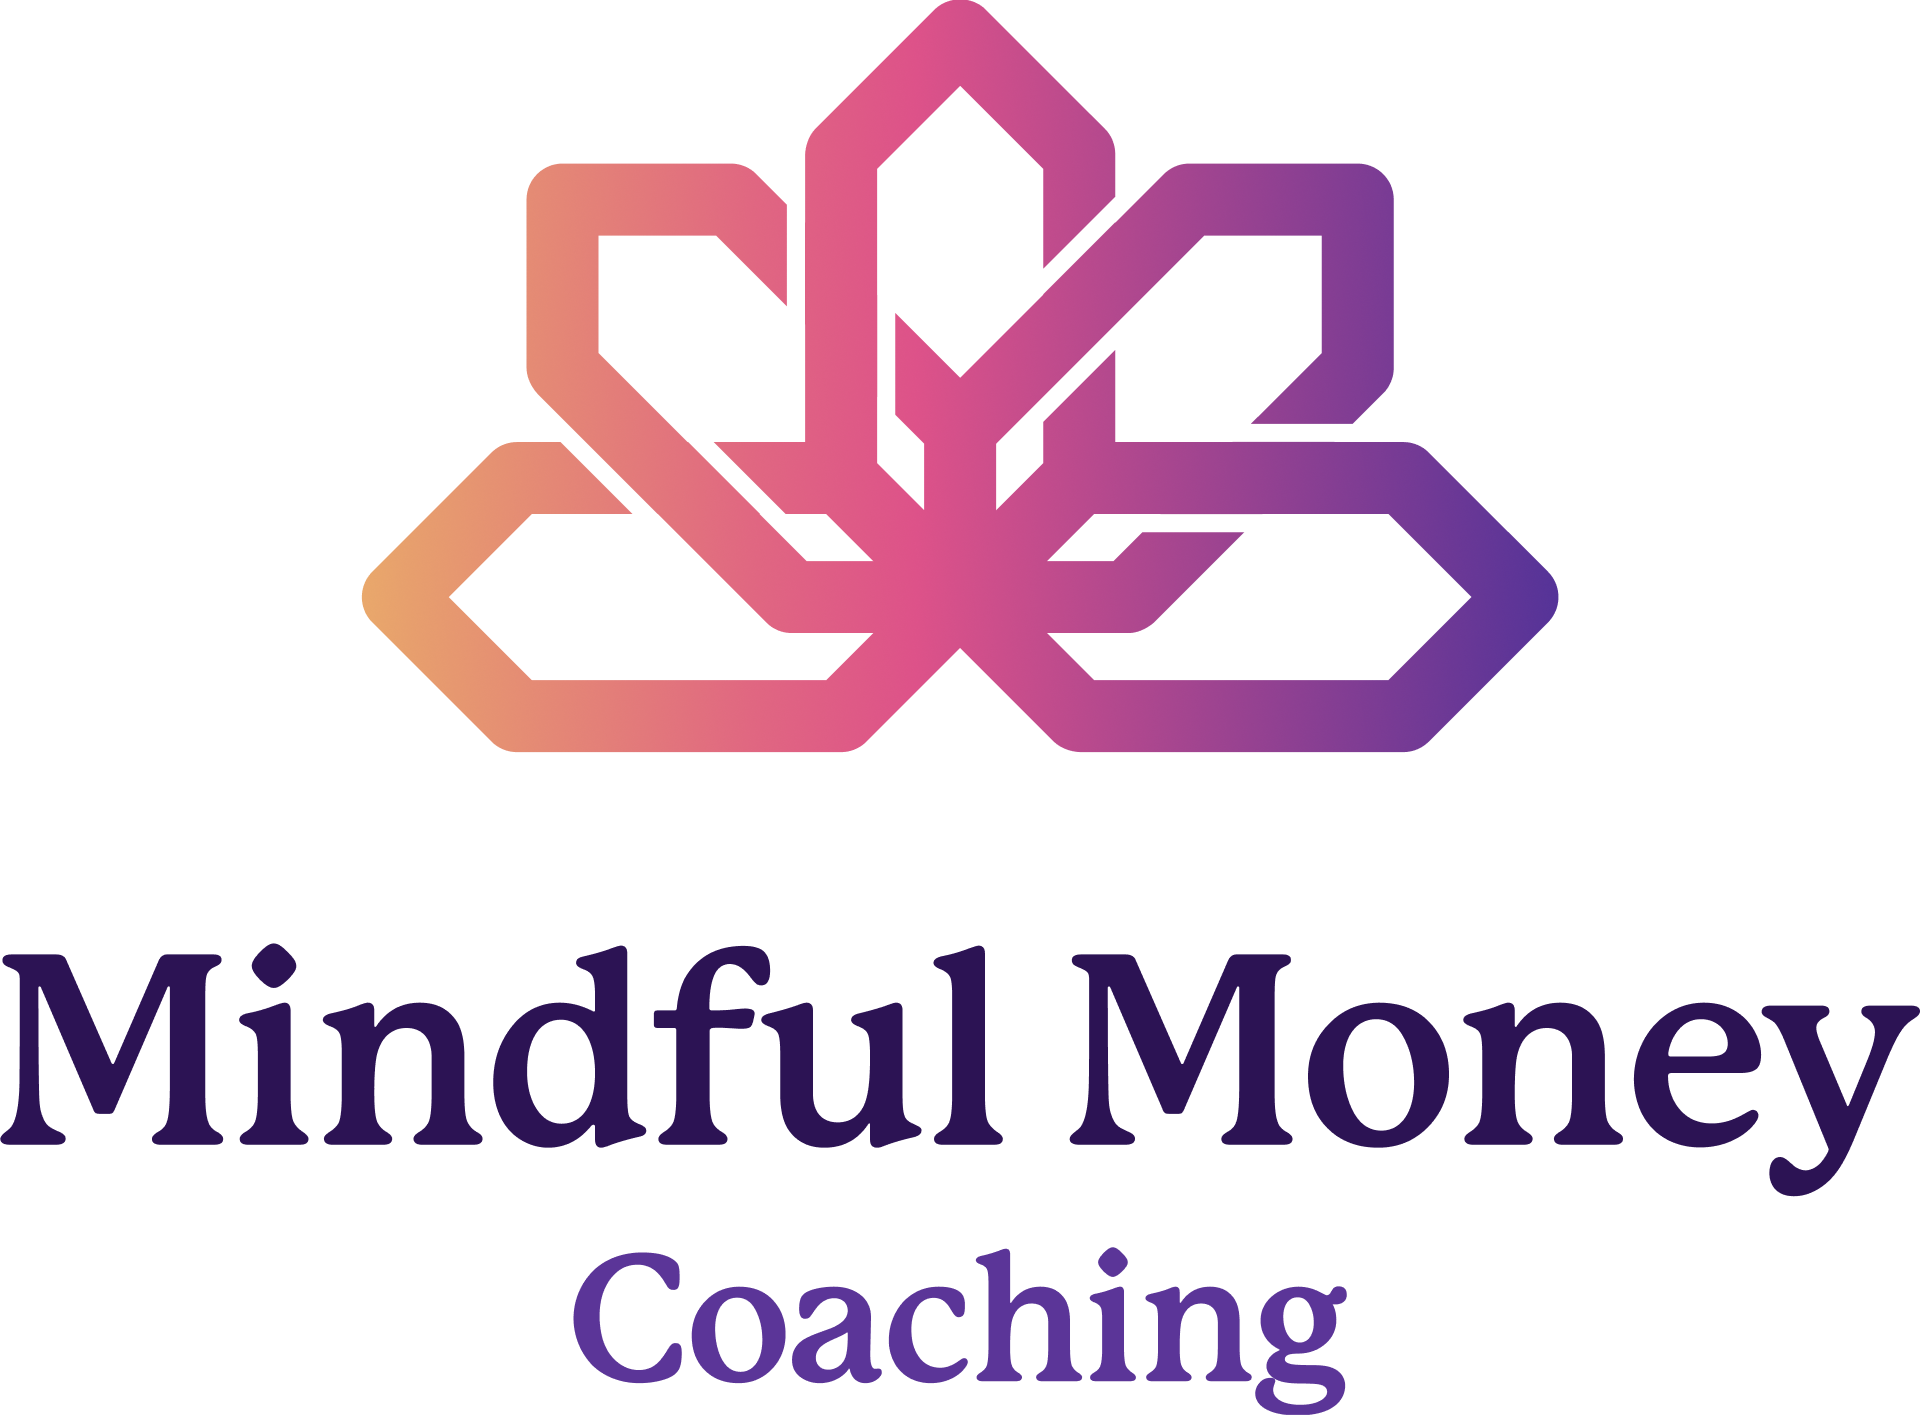 The Mindful Money Coach